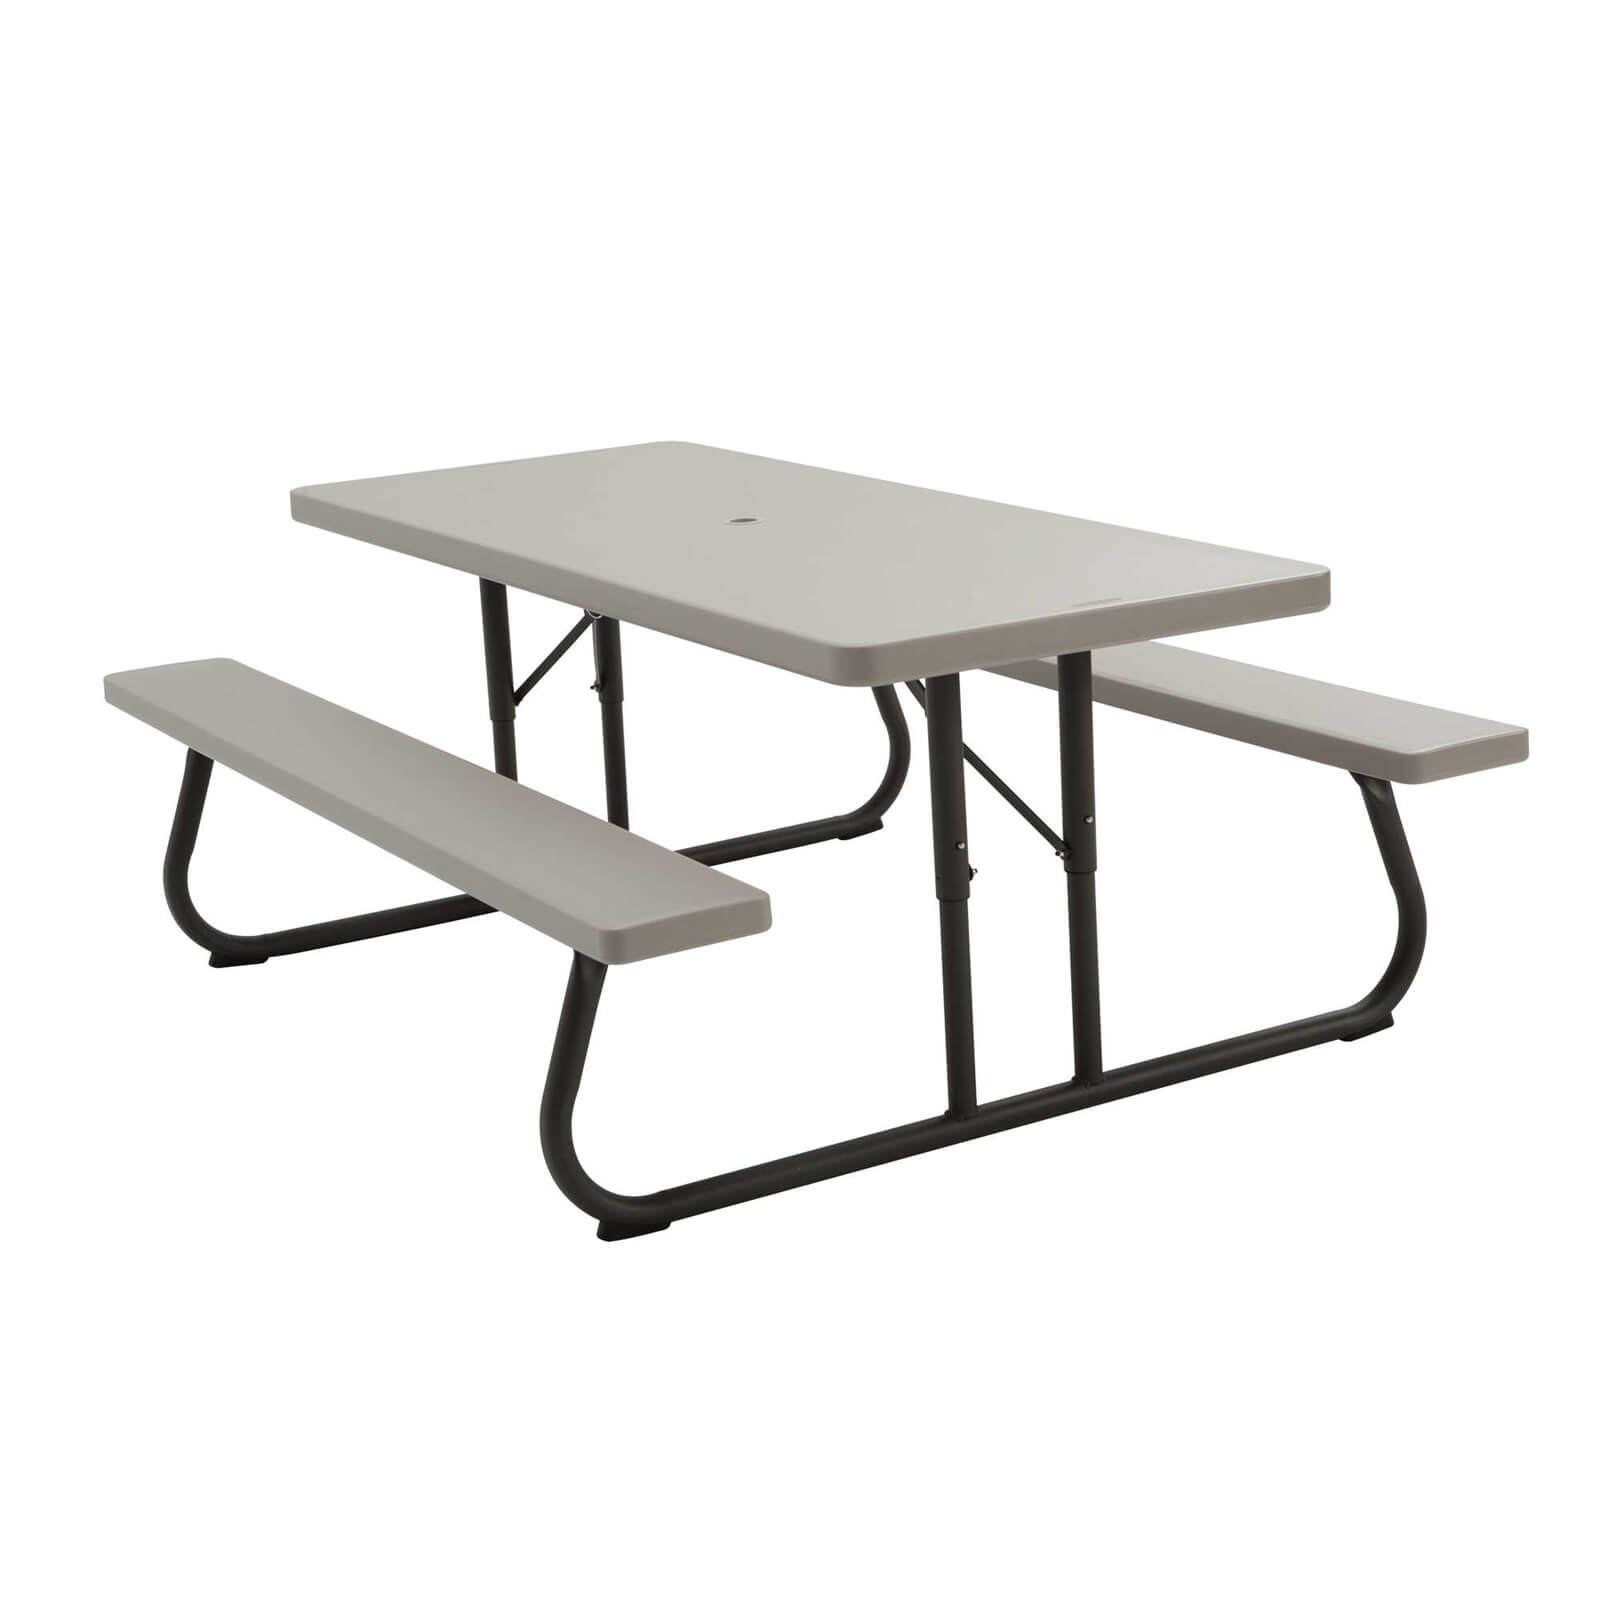 Lifetime 6ft Classic Folding Picnic Table - Putty